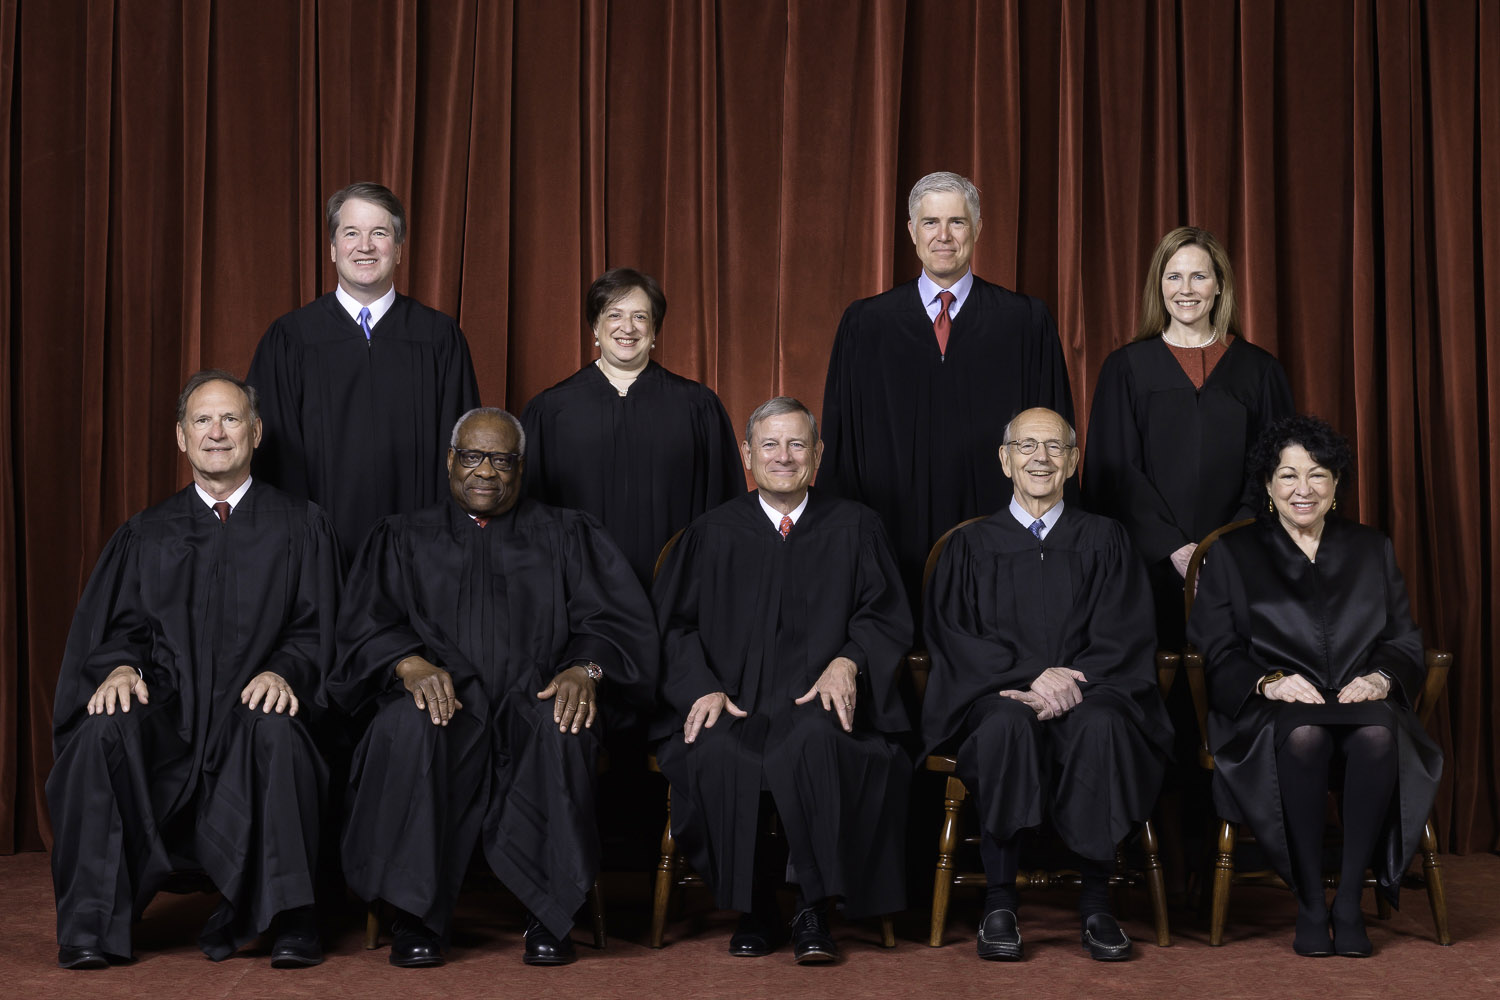 official portrait of nine justices wearing black judicial robes. five justices sit in chairs while four justices stand behind them.